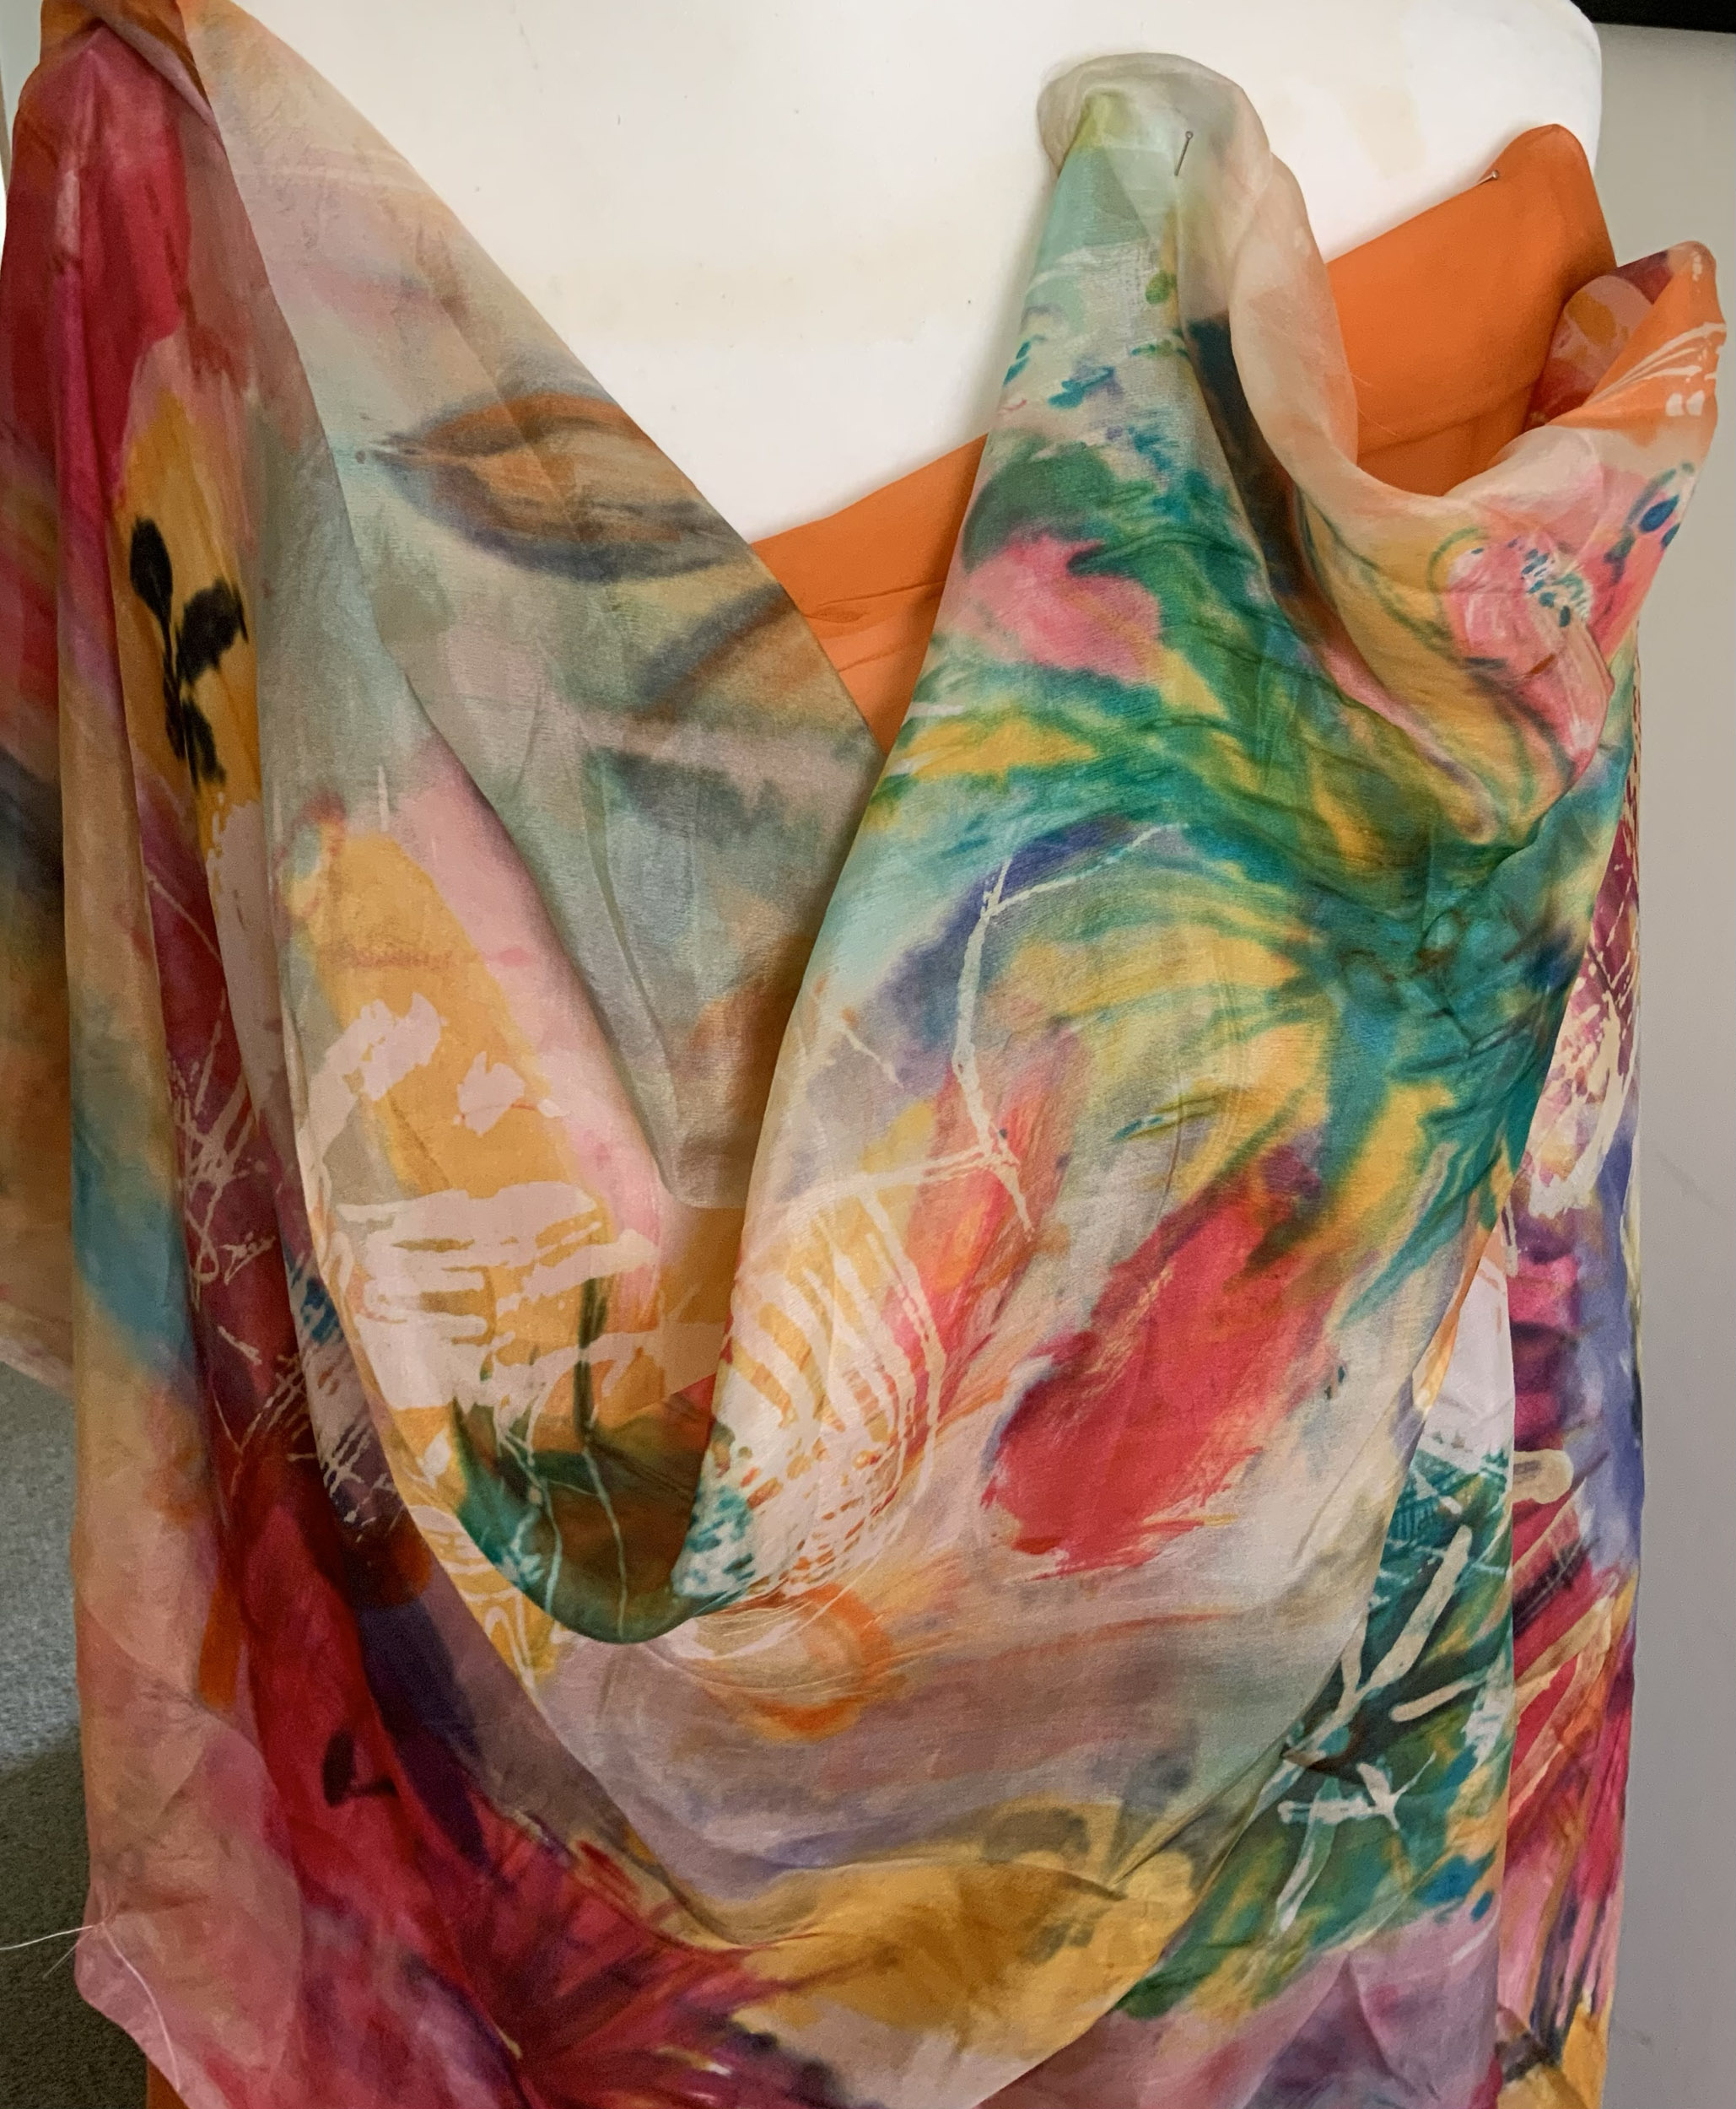 Hand-painted floral patterned silk scarf with reds greens and yellows draped over a mannequin